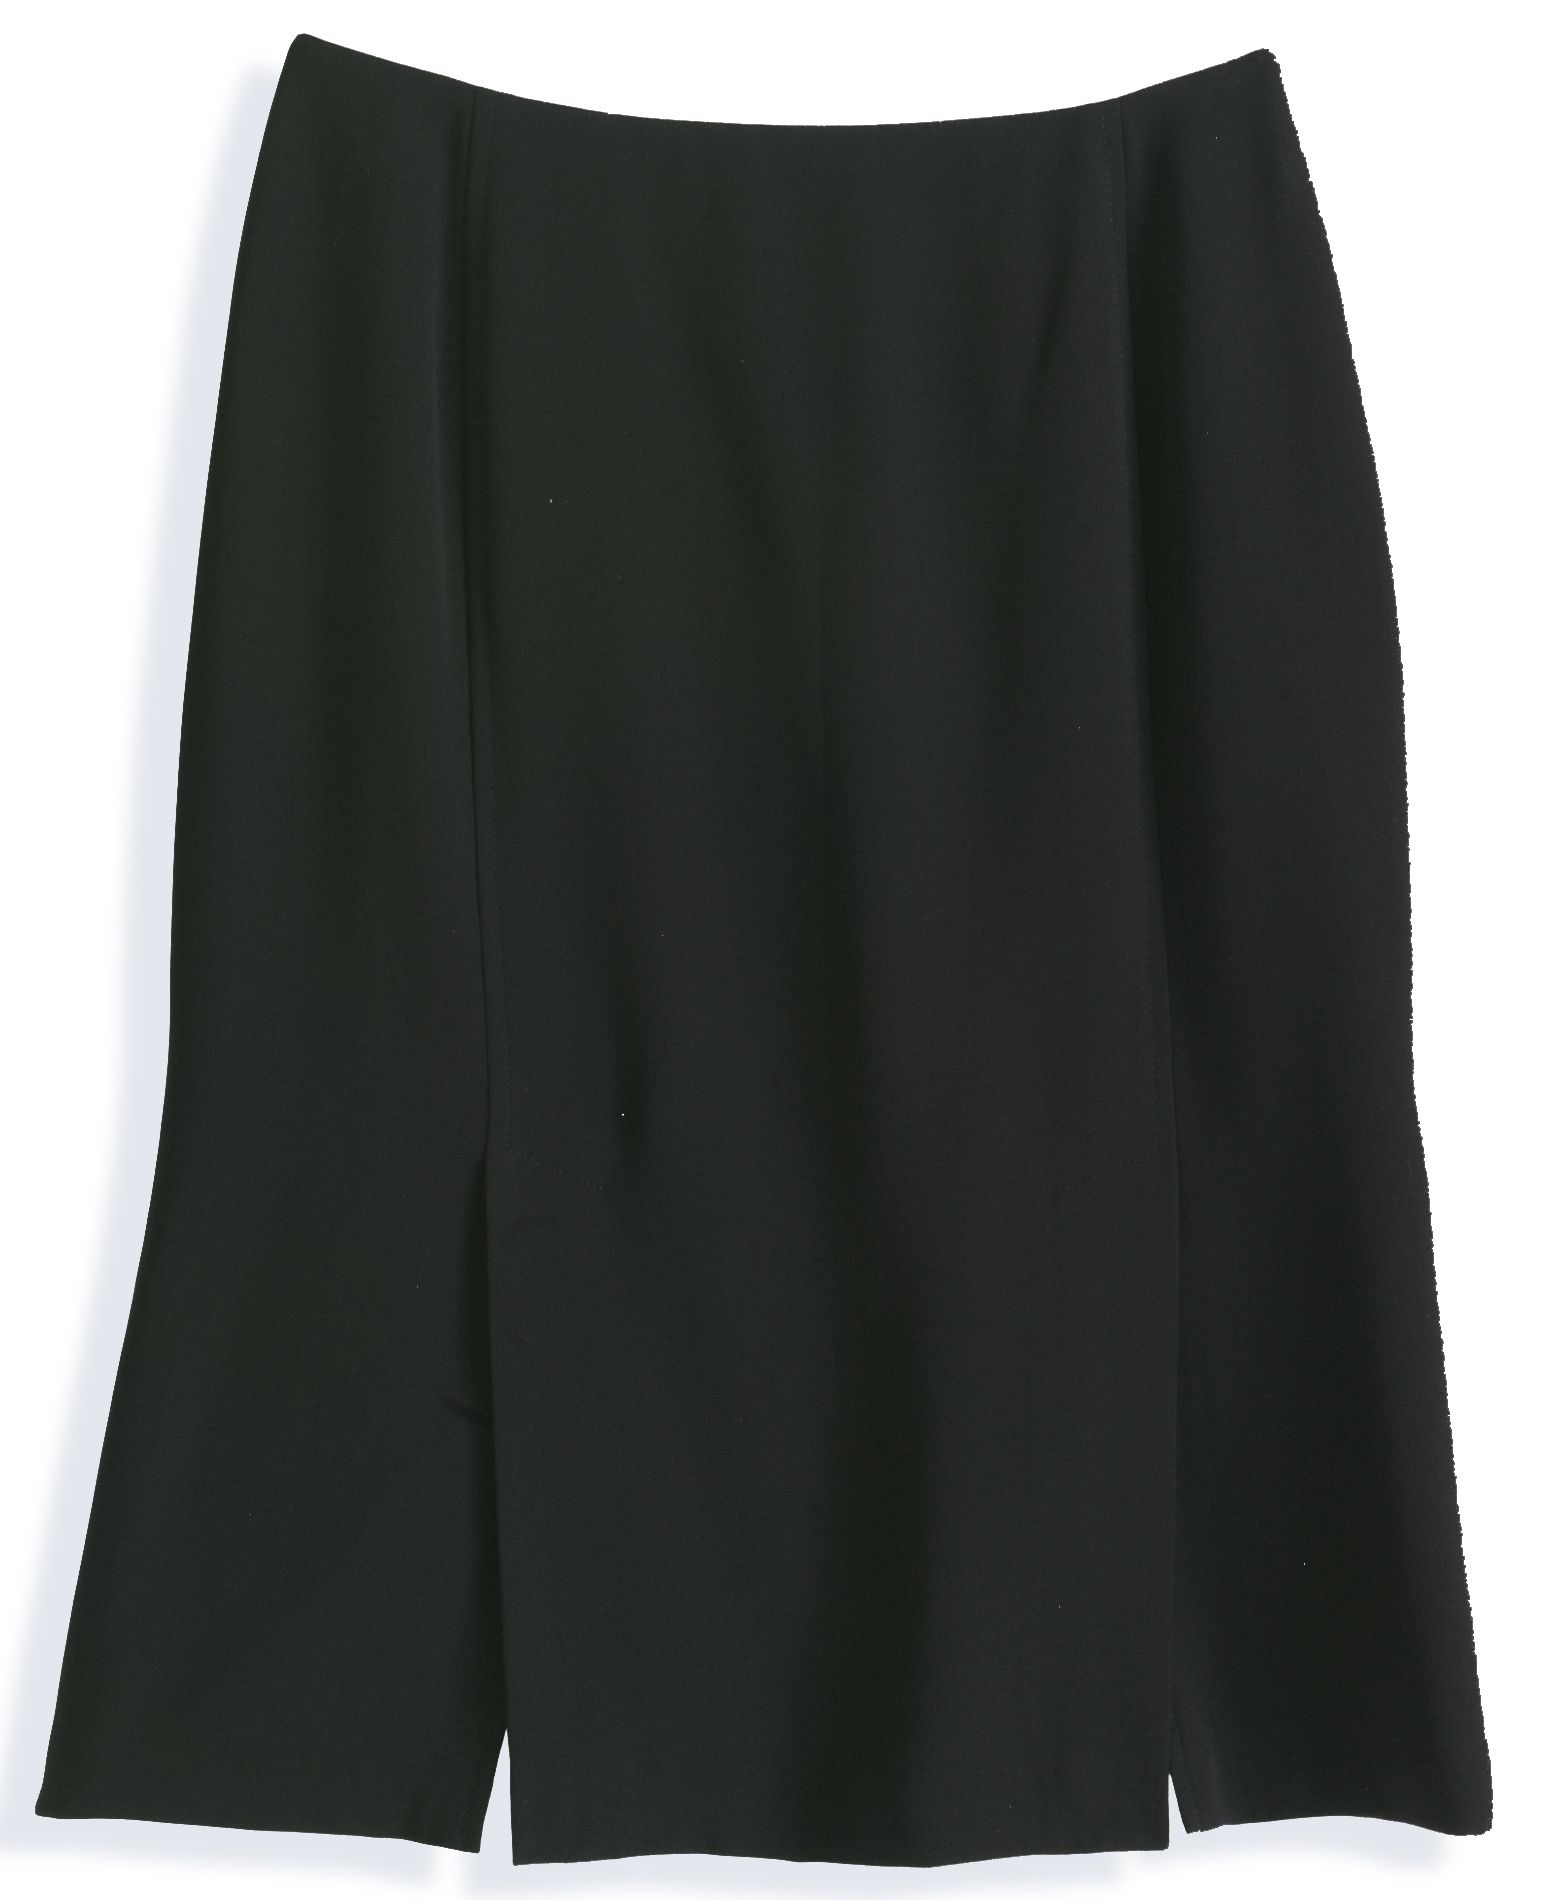 Laura Scott Piped Novelty Skirt with Pleat